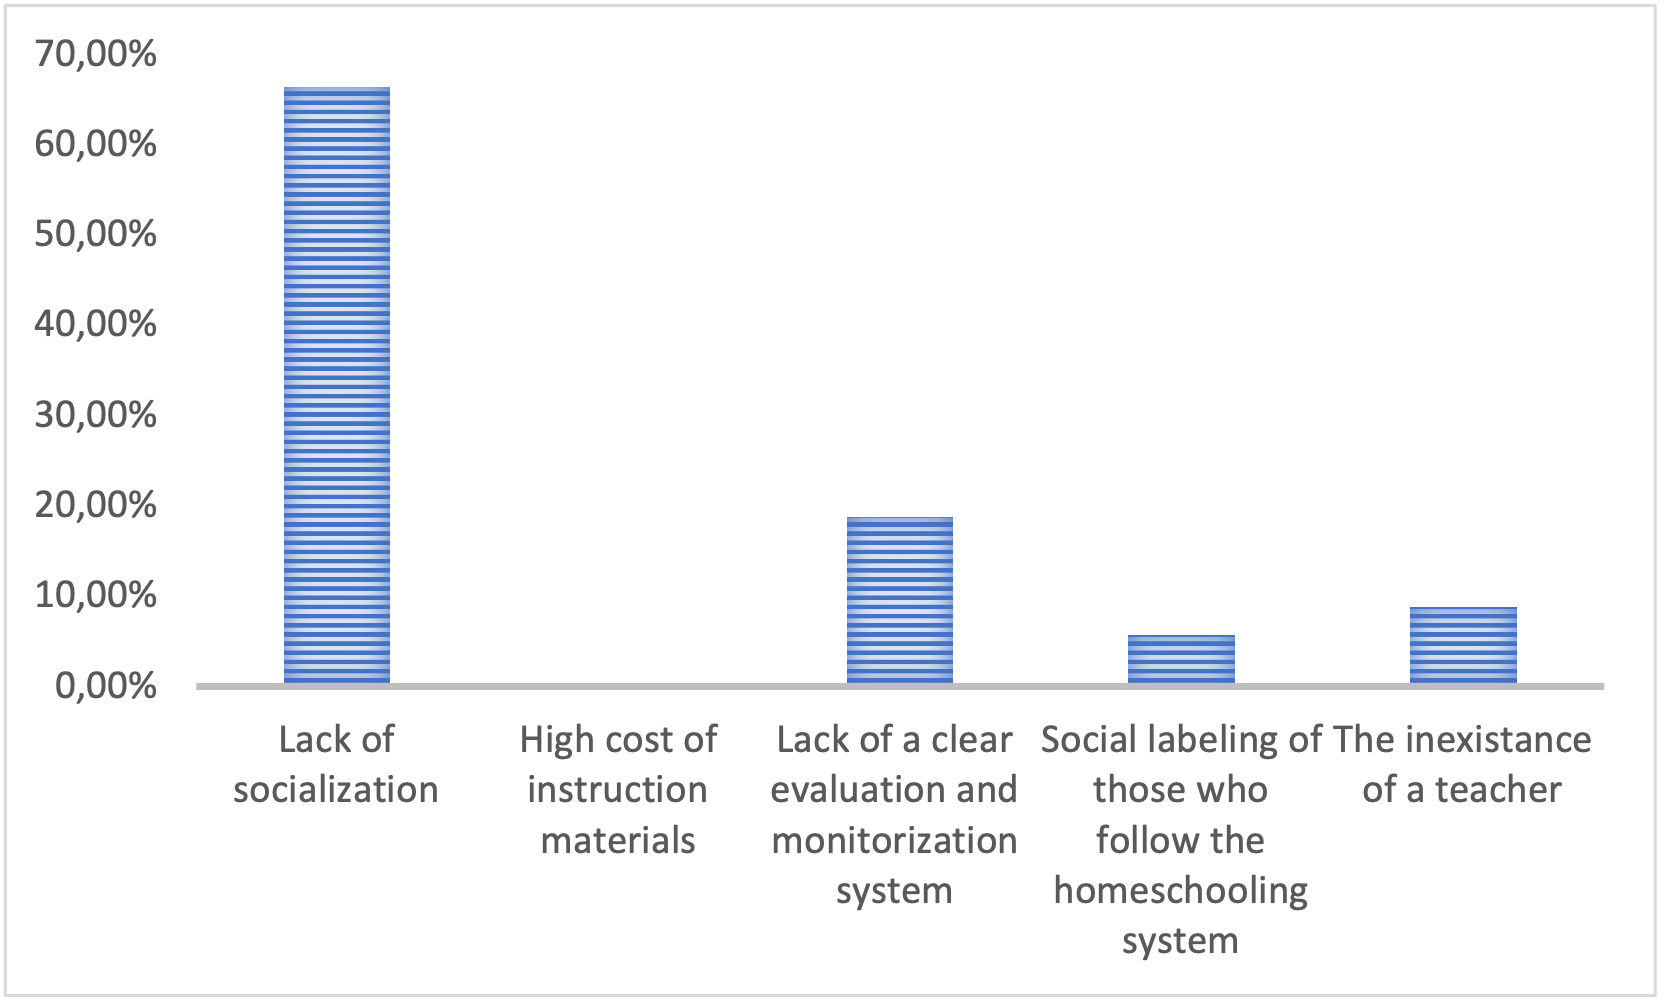 Parents/ legal representatives’ perception in relation to disadvantage of the homeschooling system